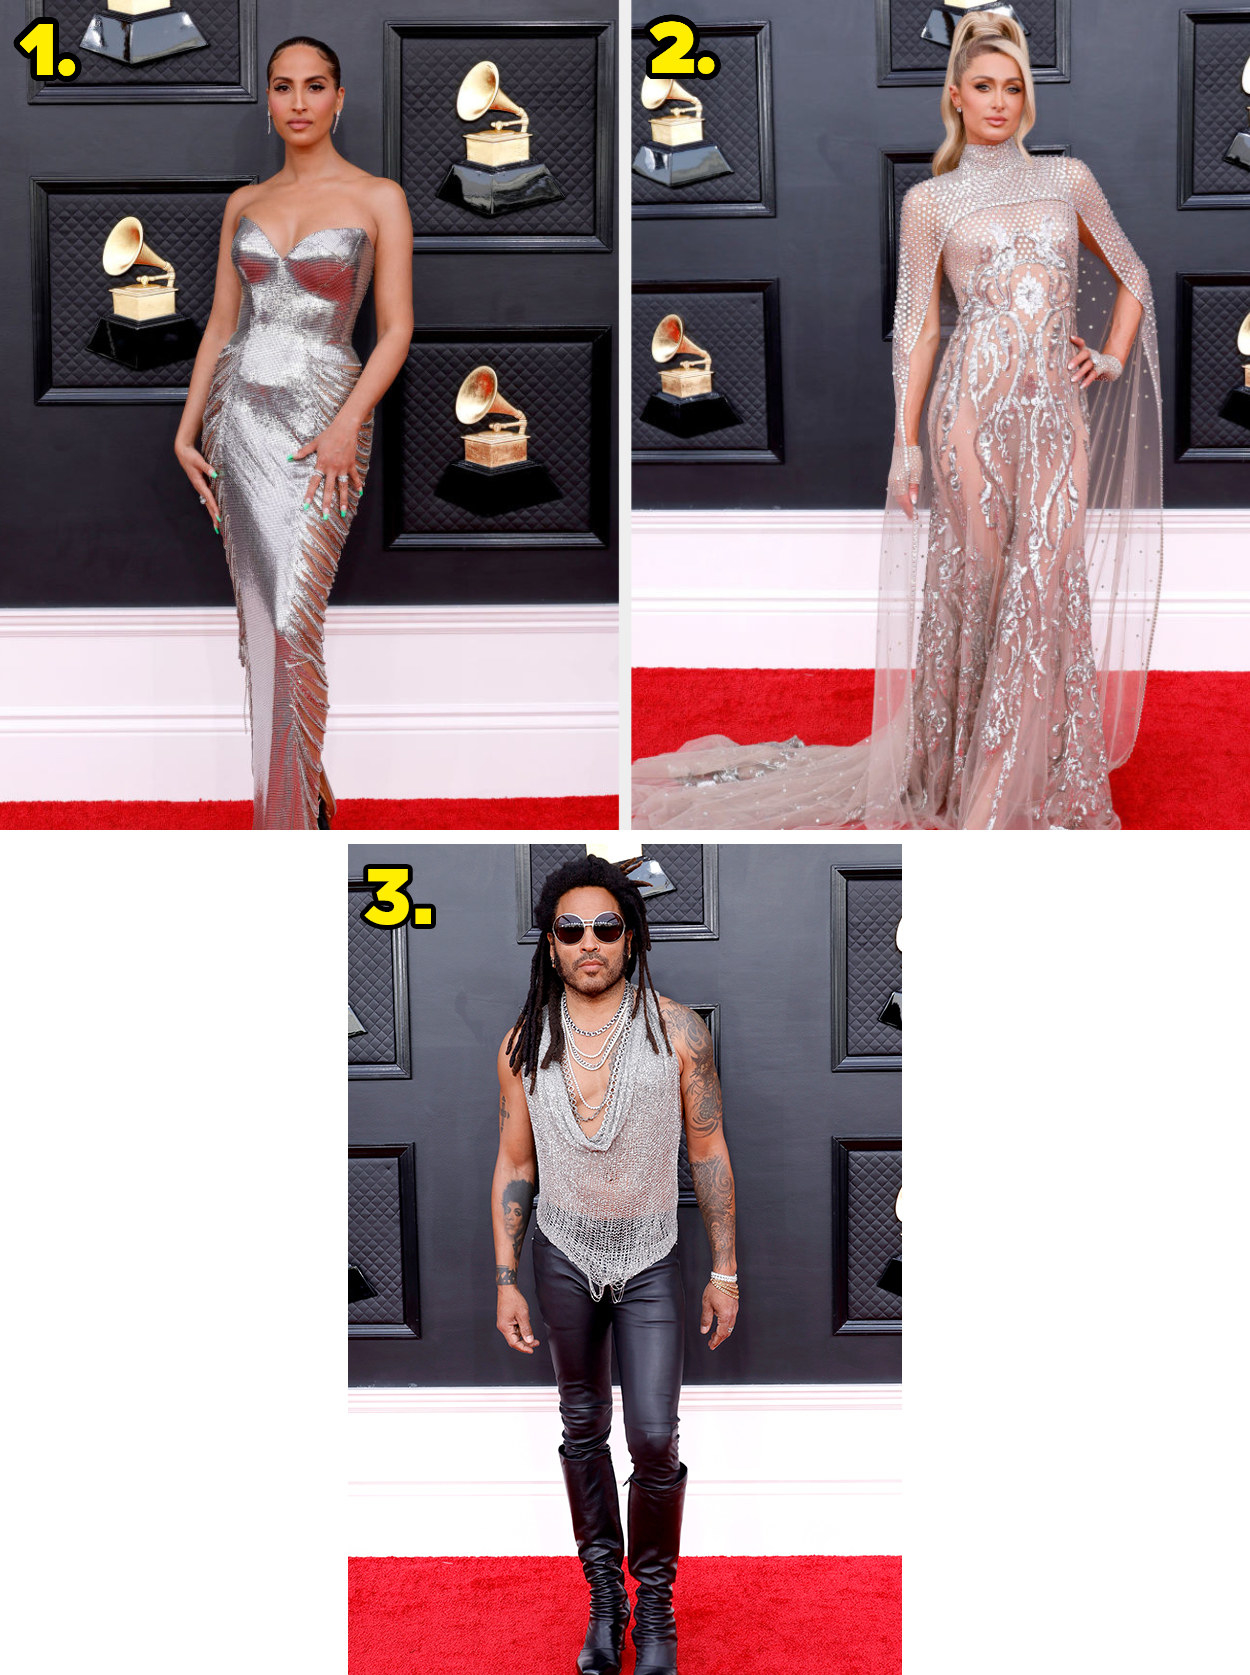 1. A strapless gown covered in sequins. 2. A sheer gown with metal embellishments and detailing. 3. A sheer sparkling top with leather pants and matching leather boots.